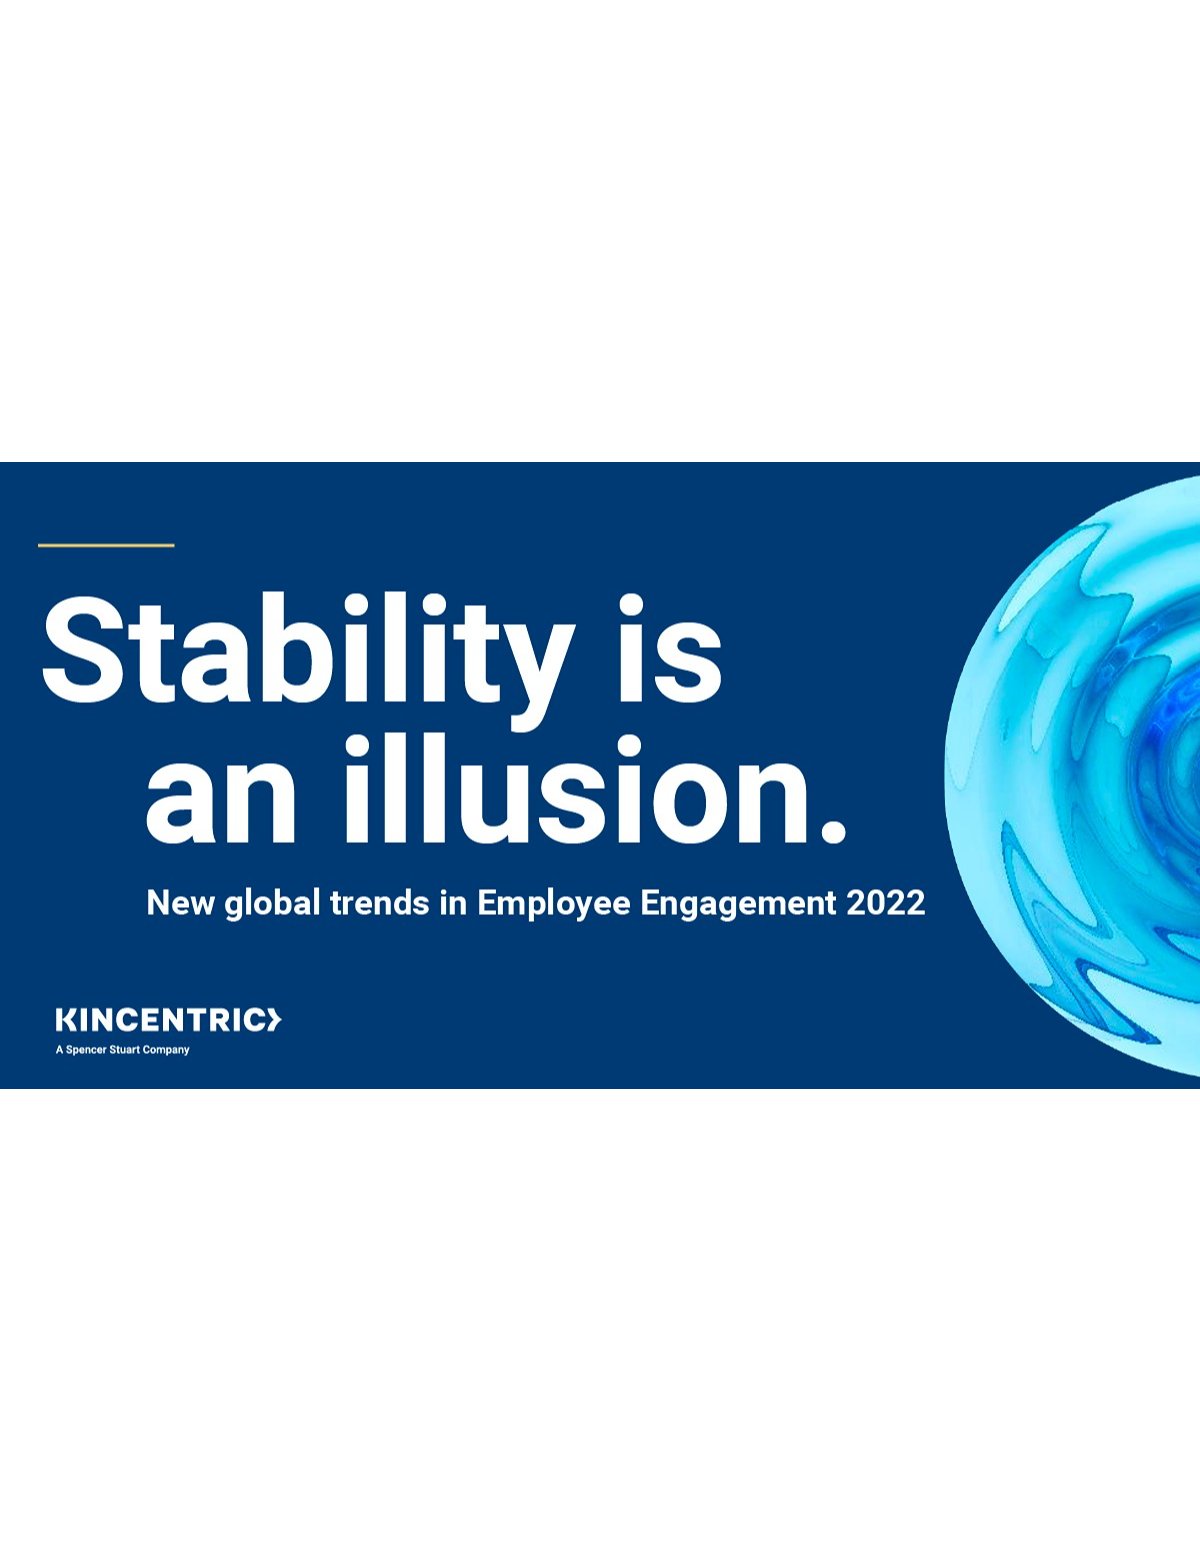 2022 Global Trends in Employee Engagement: Research Highlights